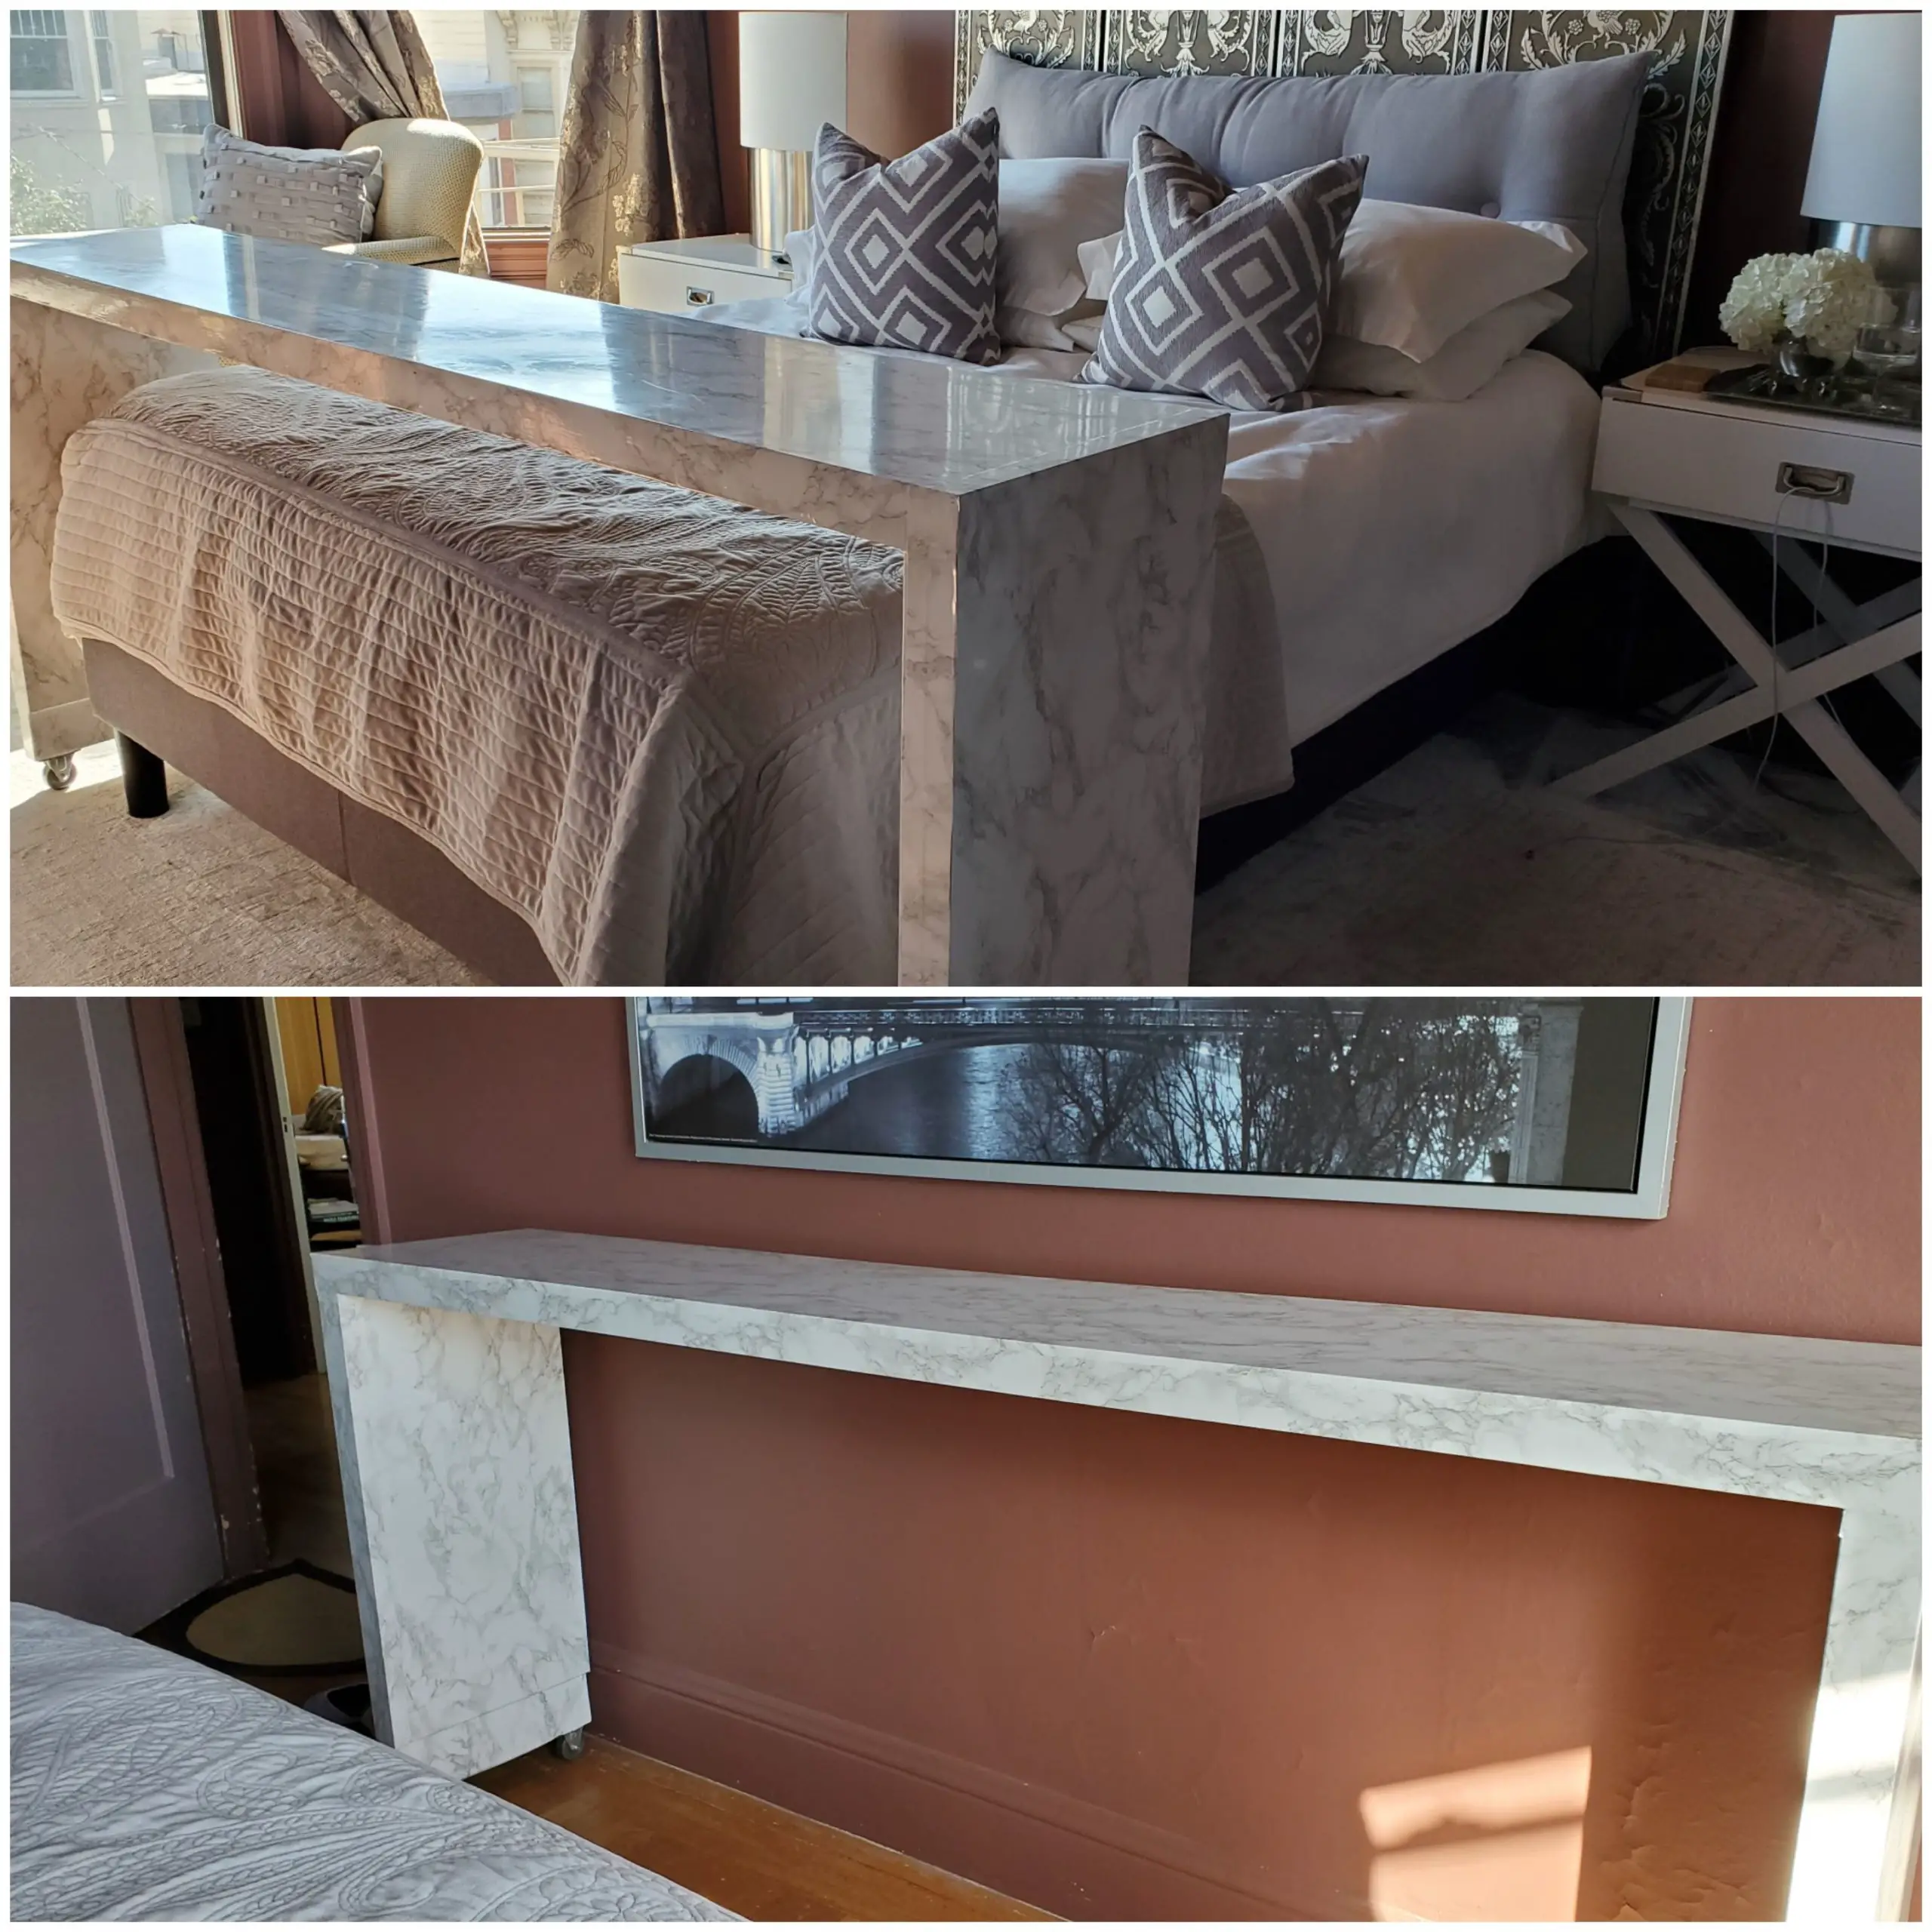 Bedroom Over Bed Marble Table Slid Out